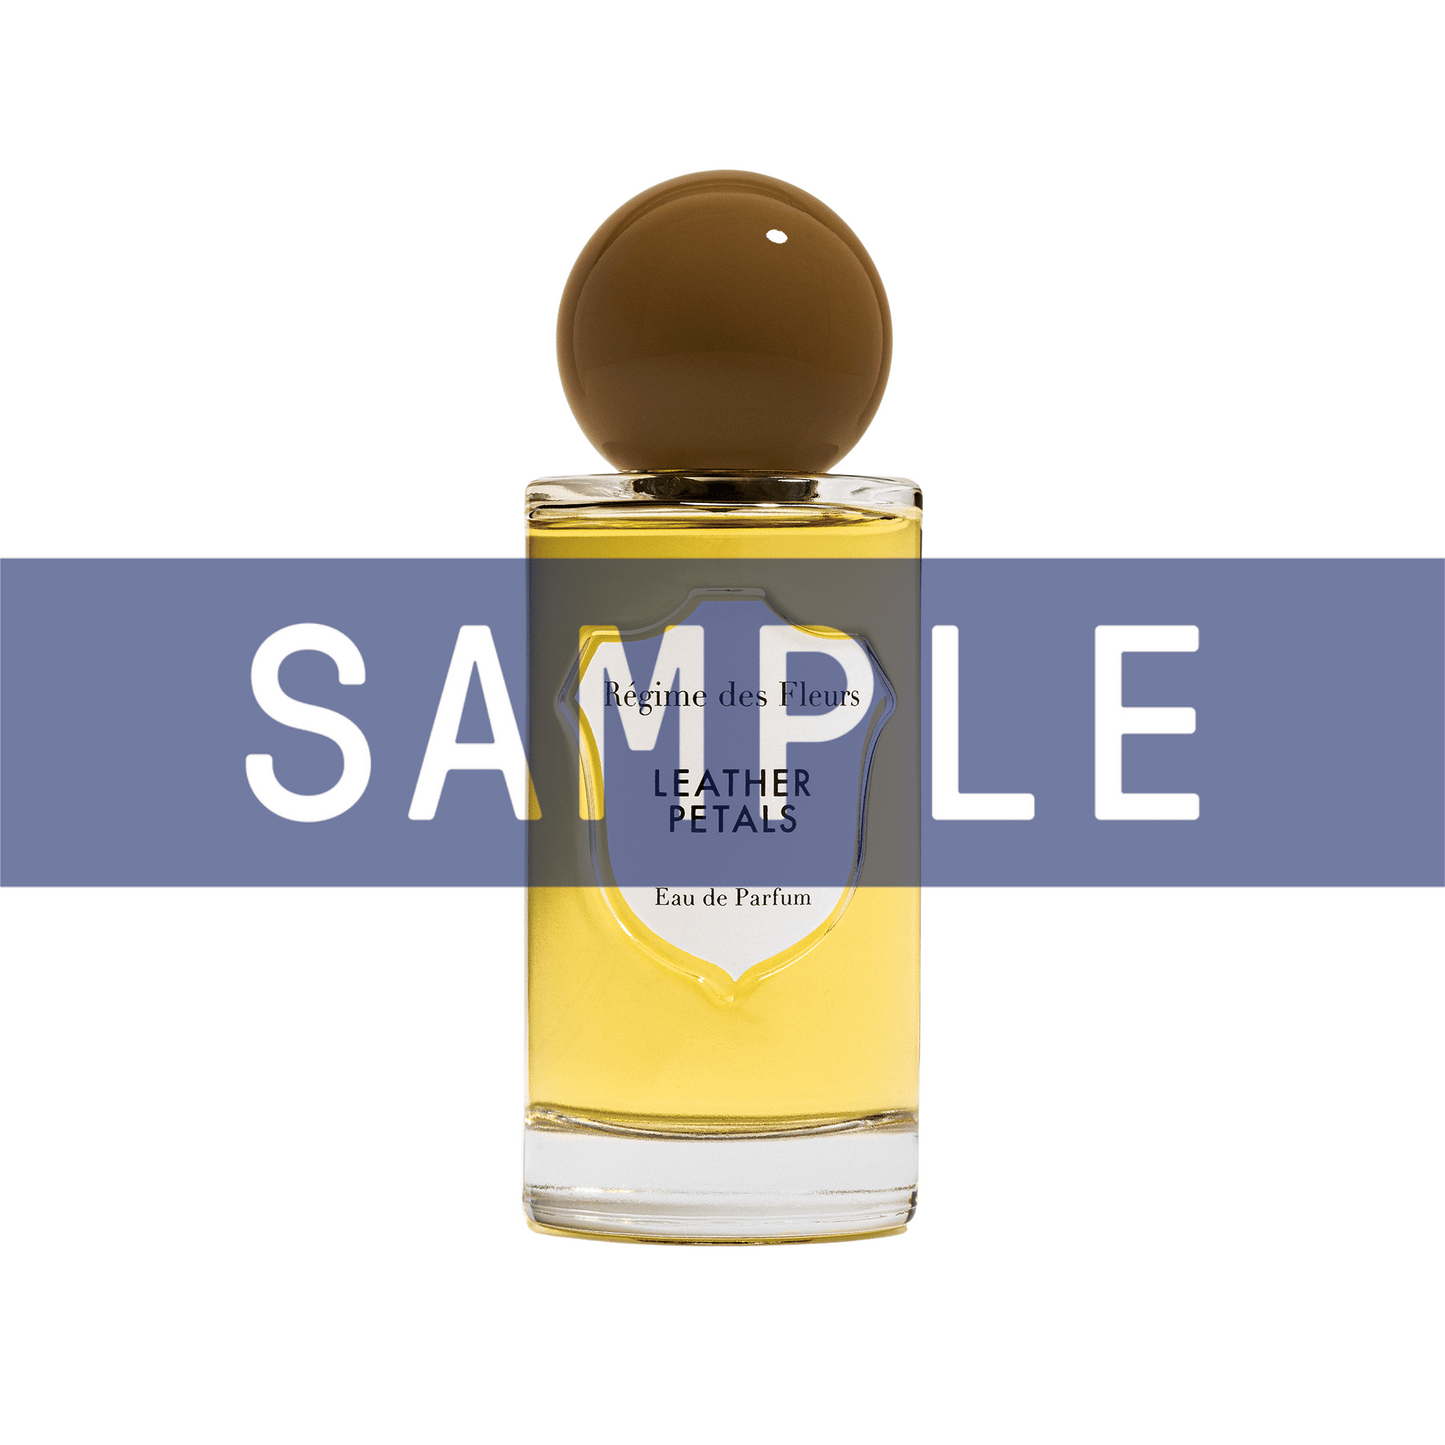 Primary Image of Sample - Leather Petals EDP